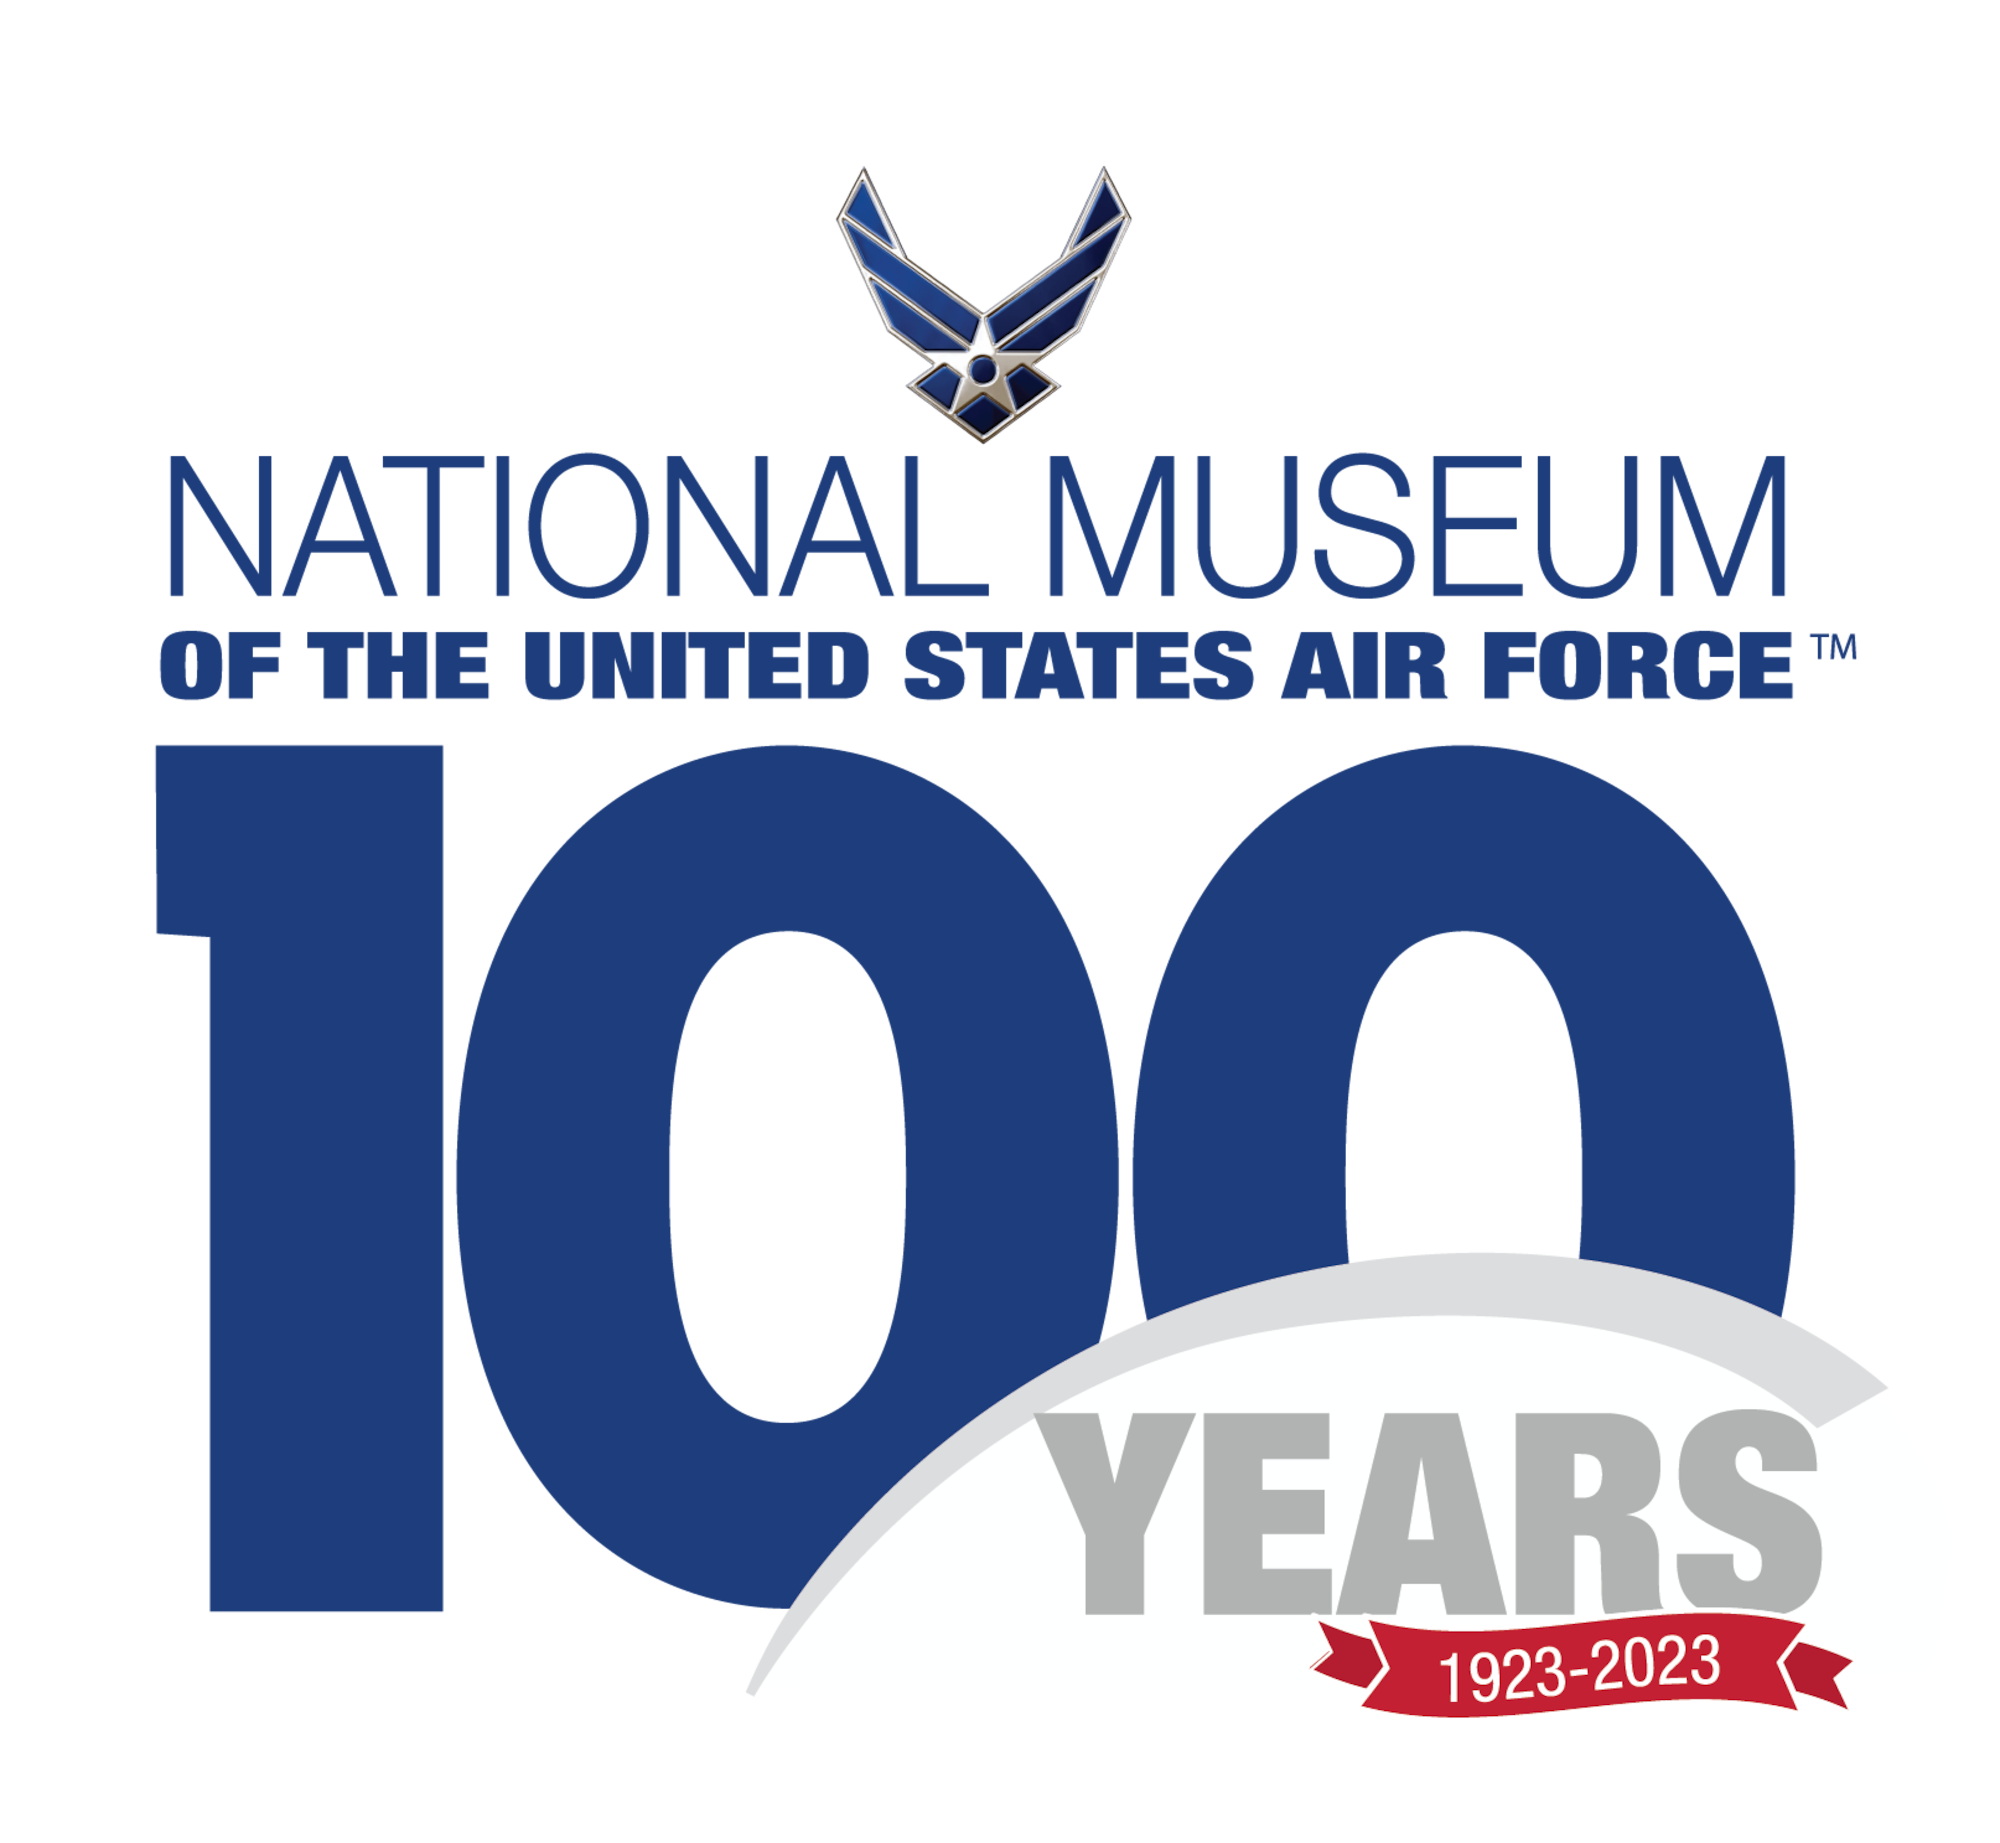 Image of the National Museum of the USAF logo with stylized AF wings with the number 100 below, and a banner saying 1923-2023.